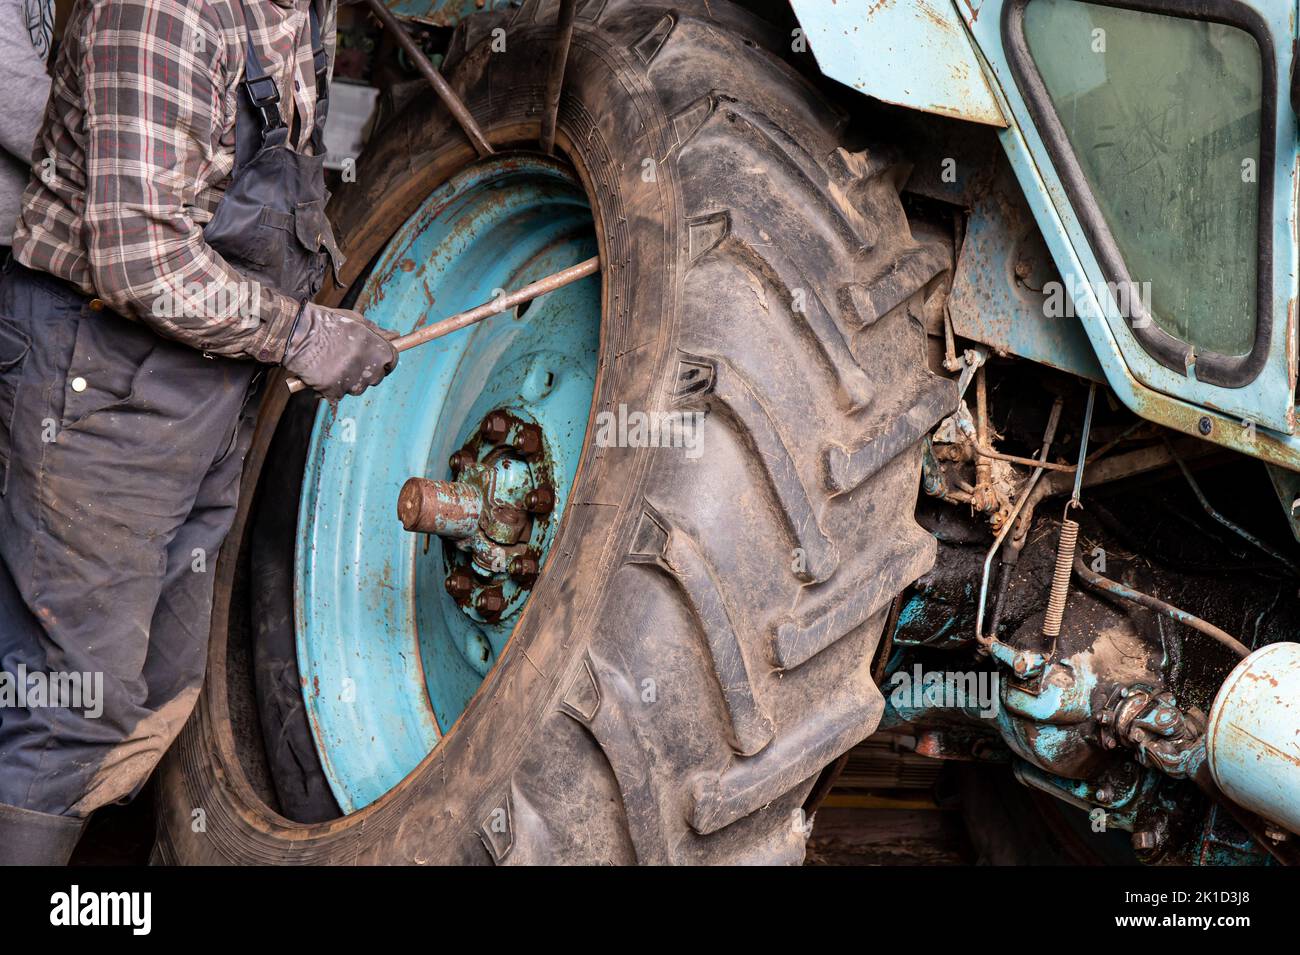 Change agricultural tractor broken tube tire at home. Man worker use crowbars to pry beneath the edge of the rim and break the bead. Stock Photo